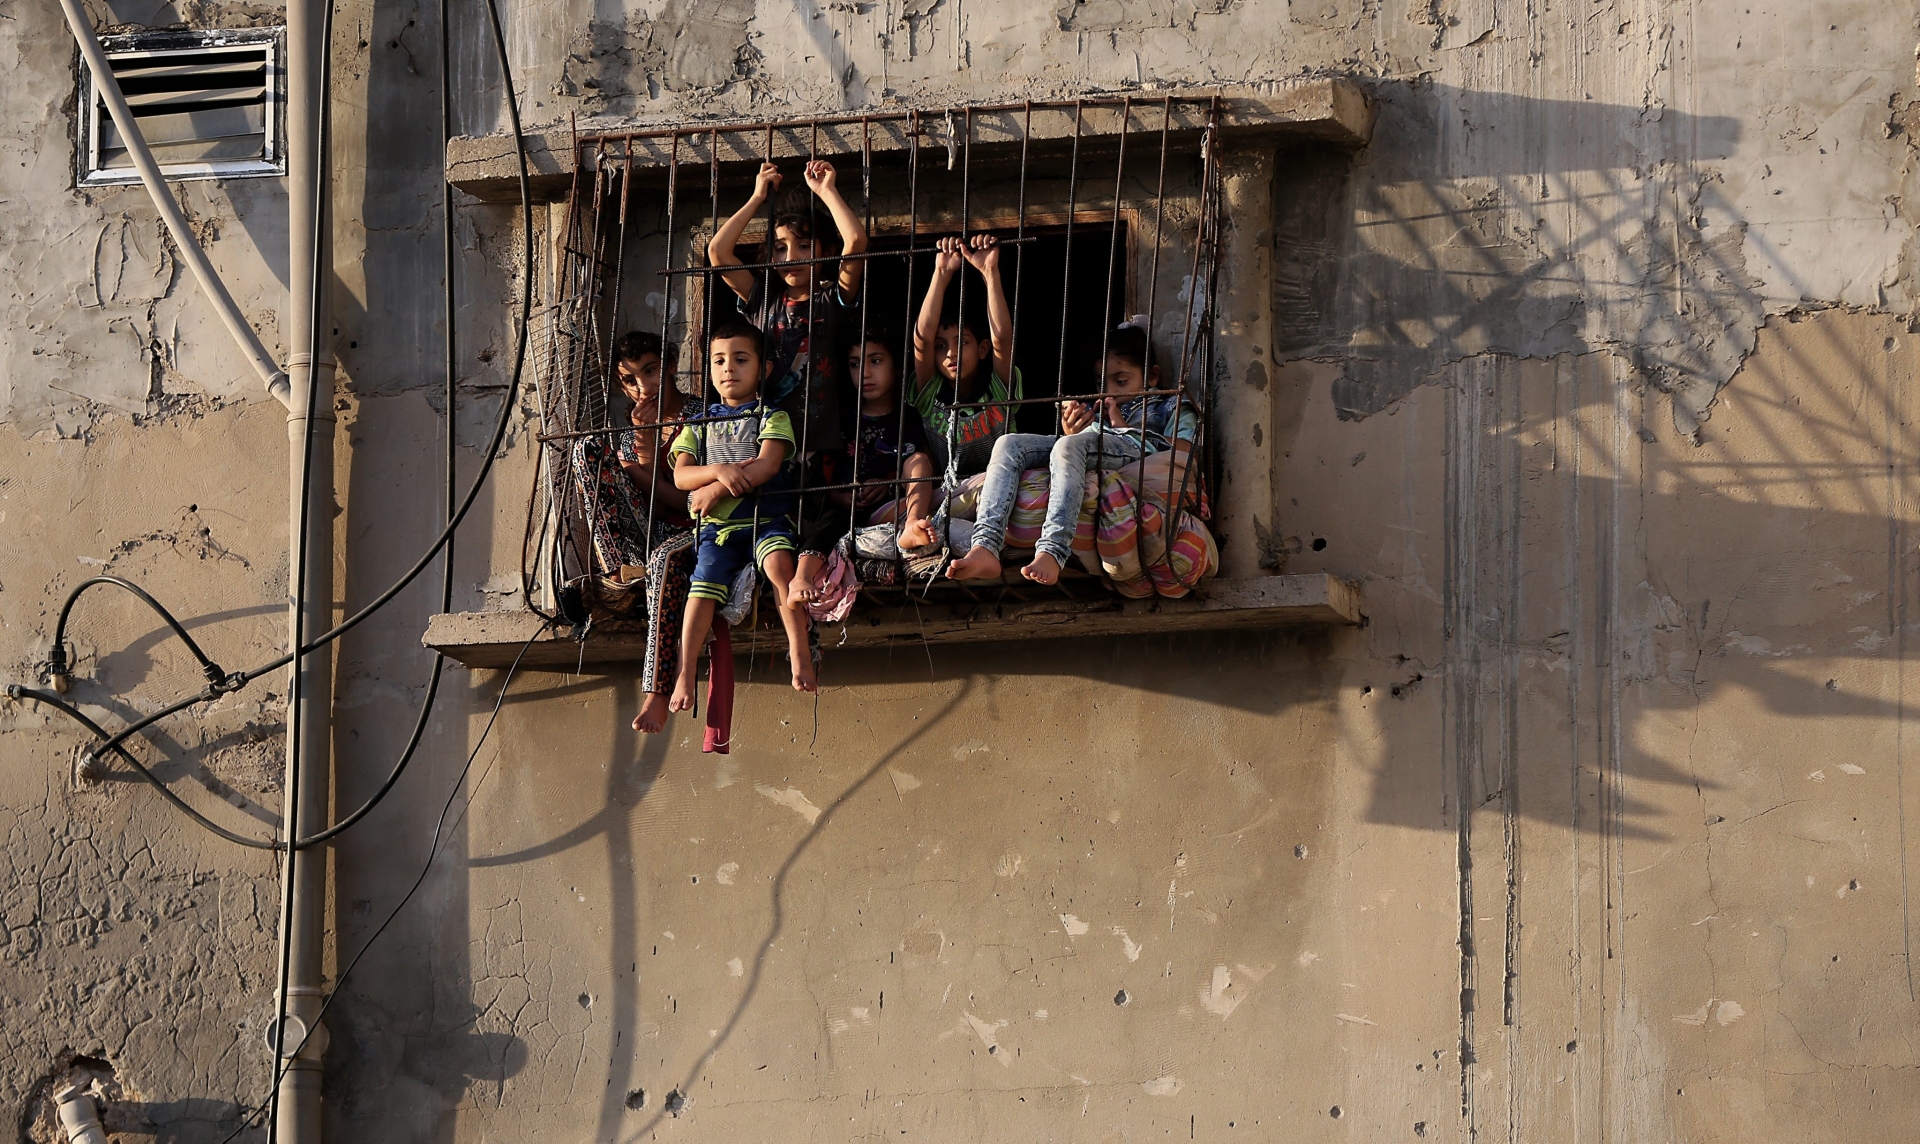 epa05291303 A picture made available on 06 May 2016 shows Palestinian children sitting at the window of their family house in the east of Al Shejaeiya neighborhood, east of Gaza City near the border between the Gaza strip and Israel, 05 May 2016. Israeli air strikes hit four Hamas sites in the east of Gaza City overnight. According to media reports, the airstrikes were conducted as retaliation for mortar attacks on Israeli Defense Force personnel along the border region.  EPA/MOHAMMED SABER MIDEAST ISRAEL PALESTINIANS ISRAELI STRIKES